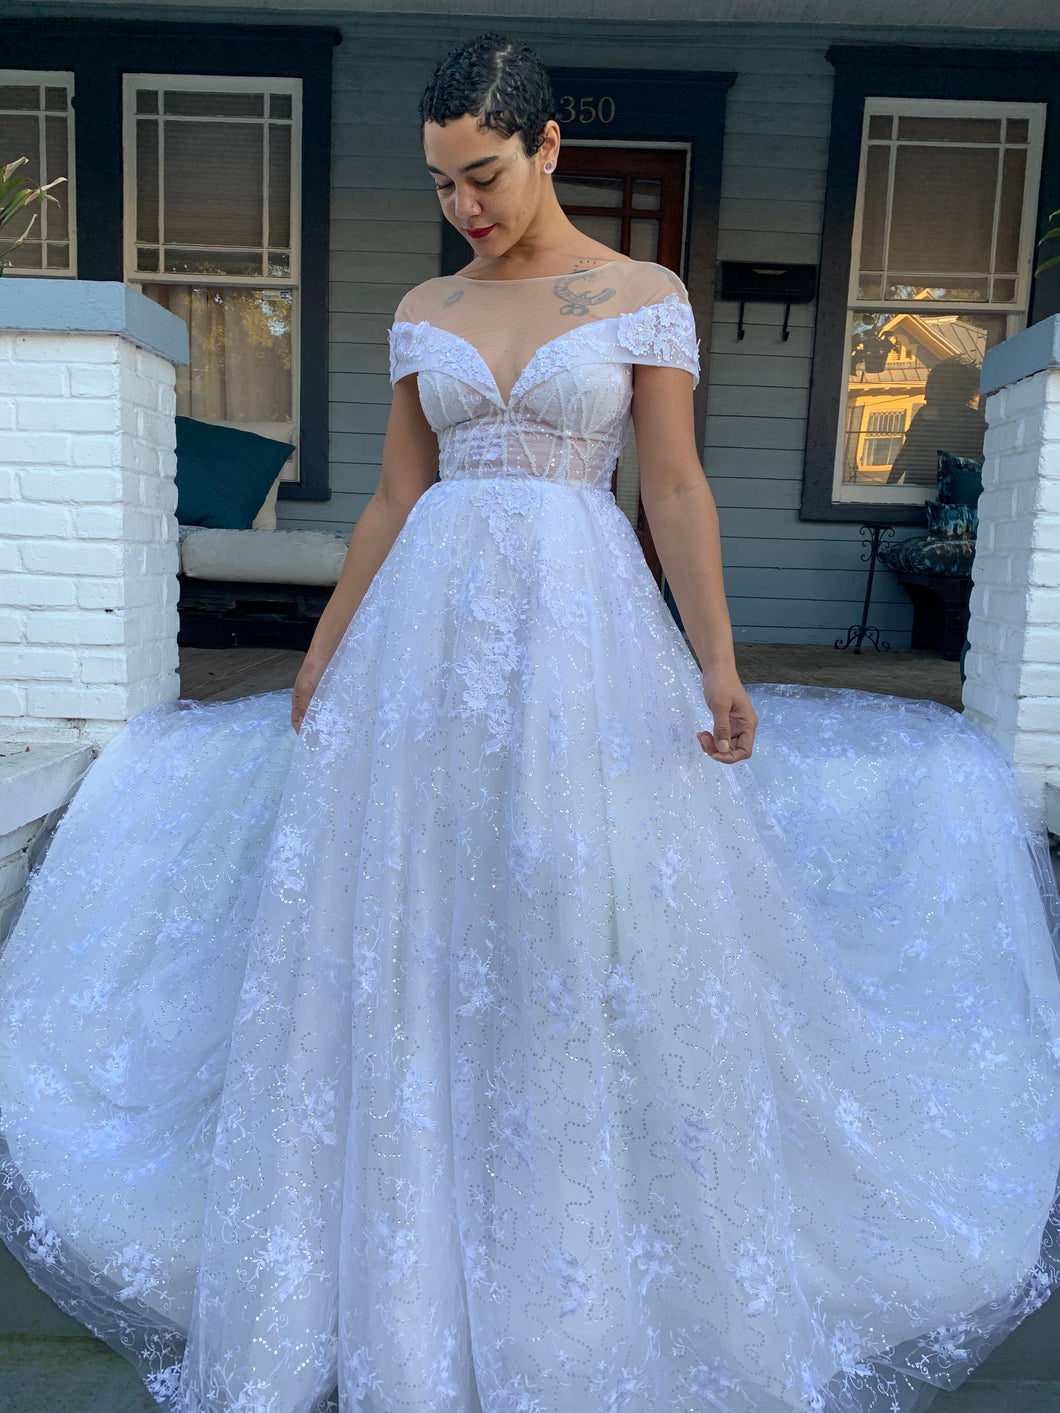 Sample Olga - Illusion off the shoulder ball gown